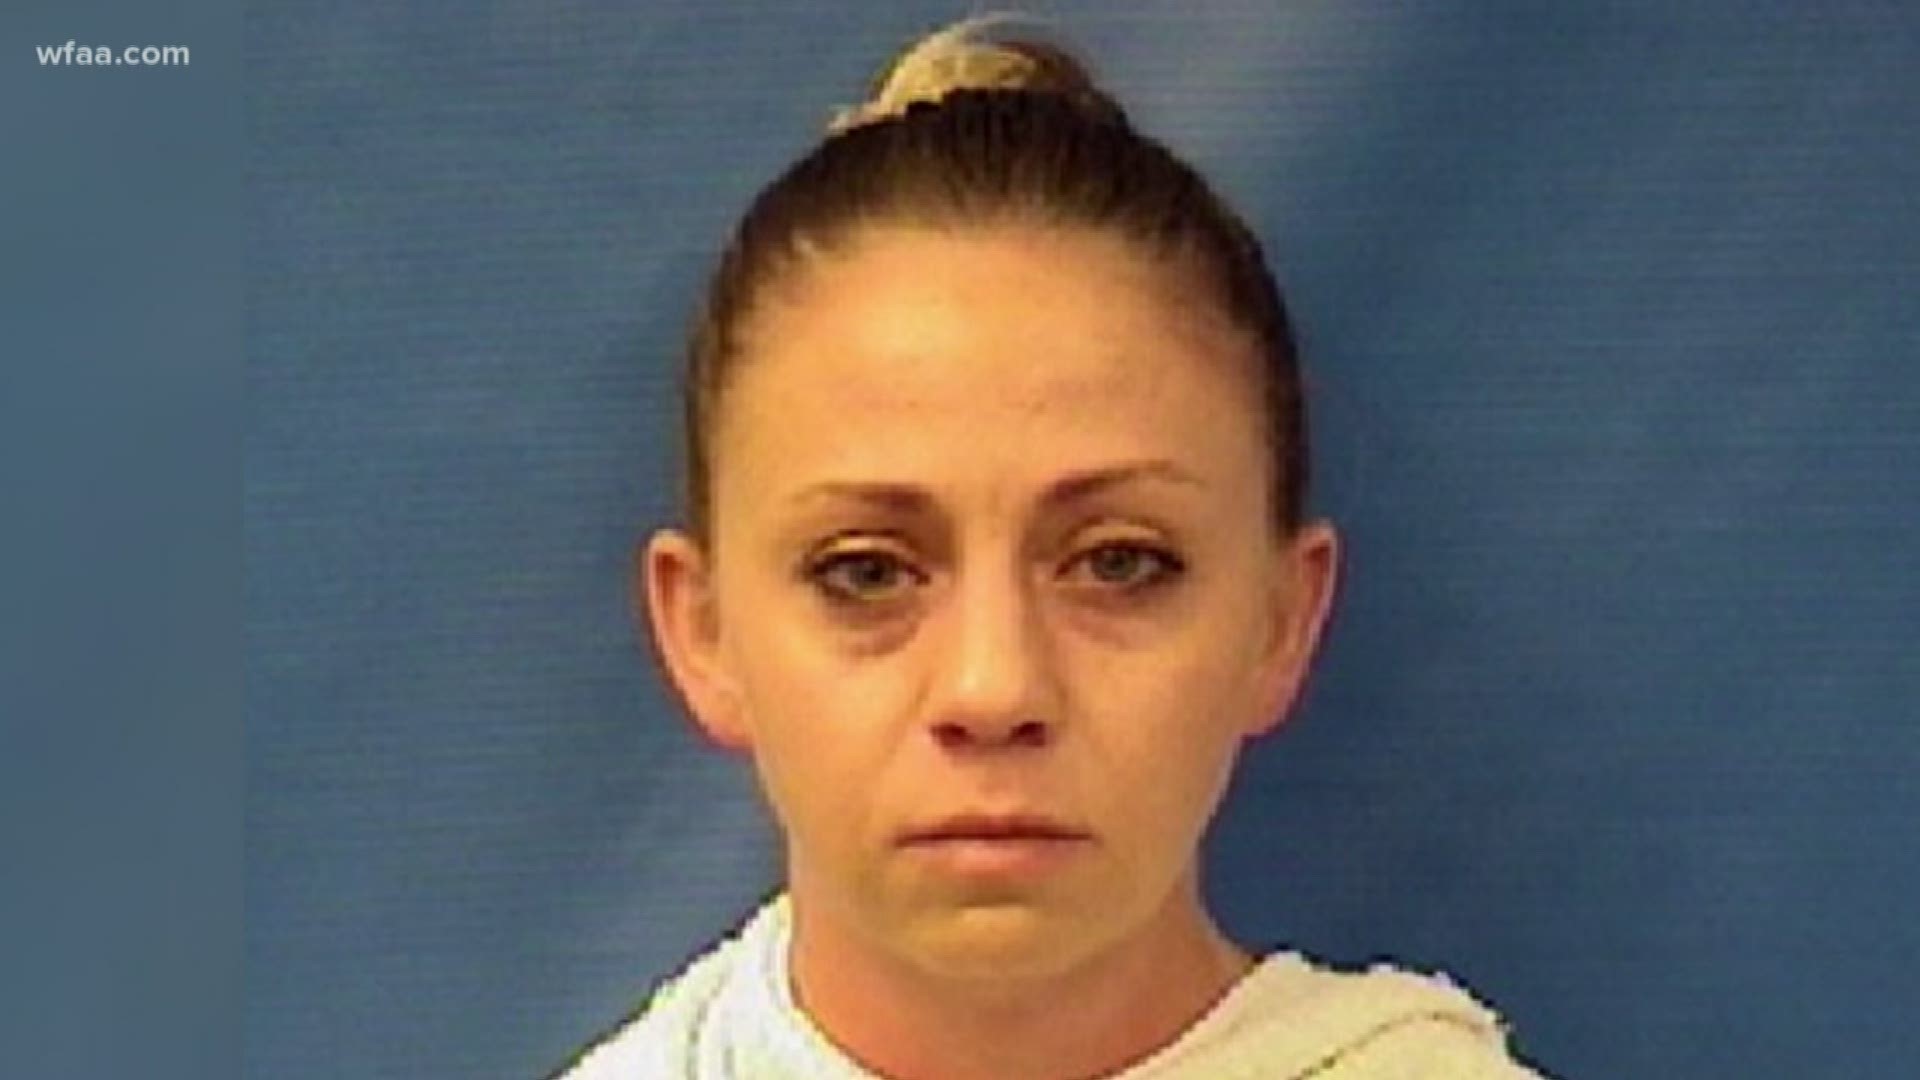 Amber Guyger was arrested on a manslaughter charge for the fatal shooting of Botham Shem Jean. WFAA